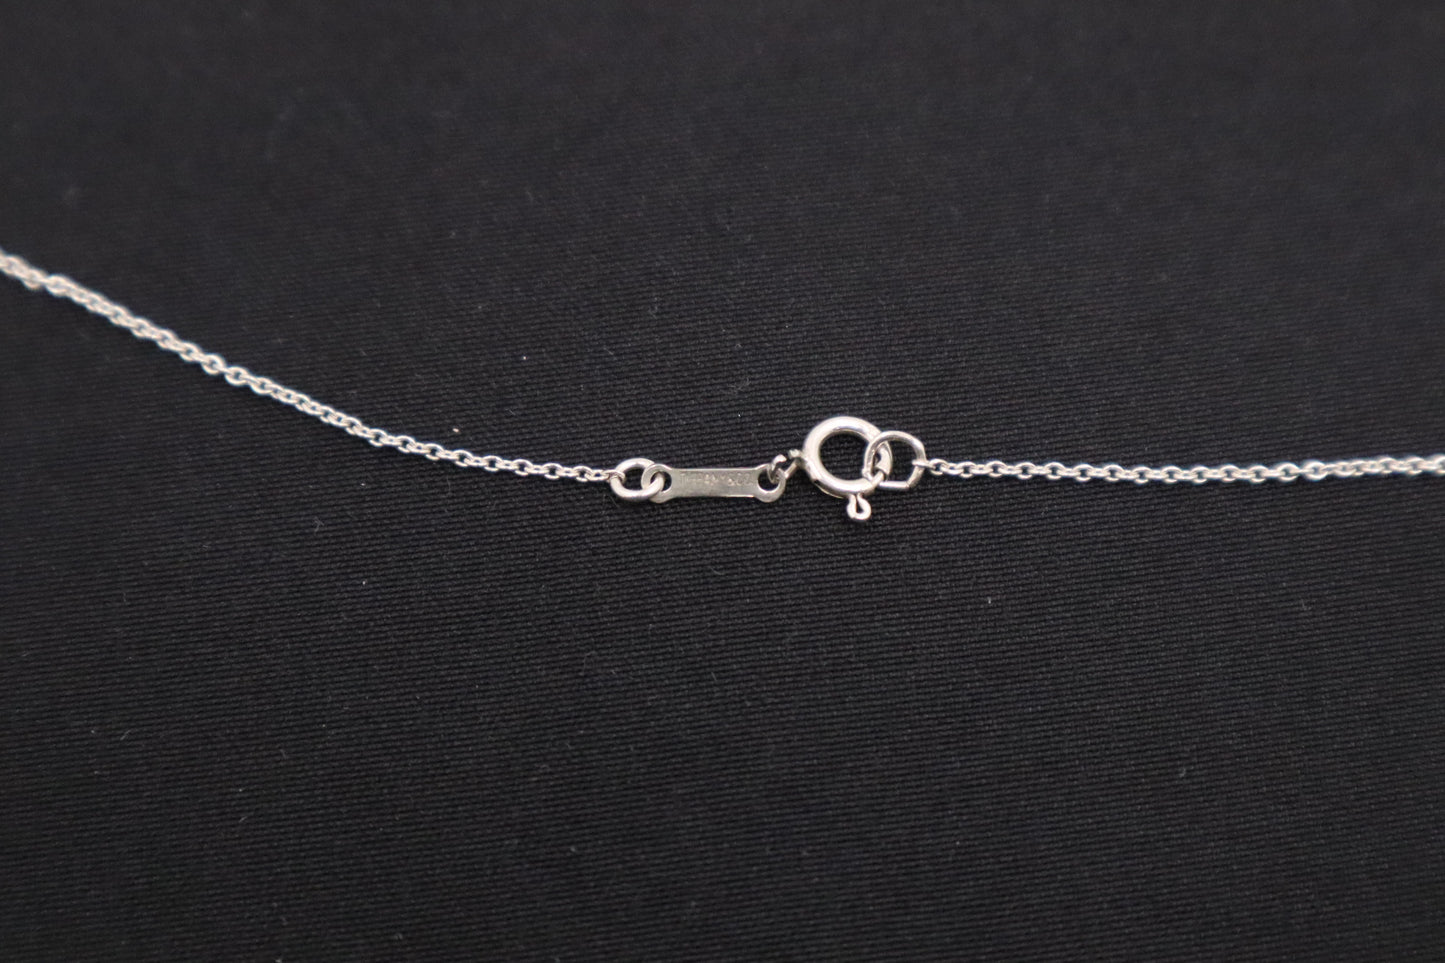 Tiffany & Co. Bird Necklace in Sterling Silver